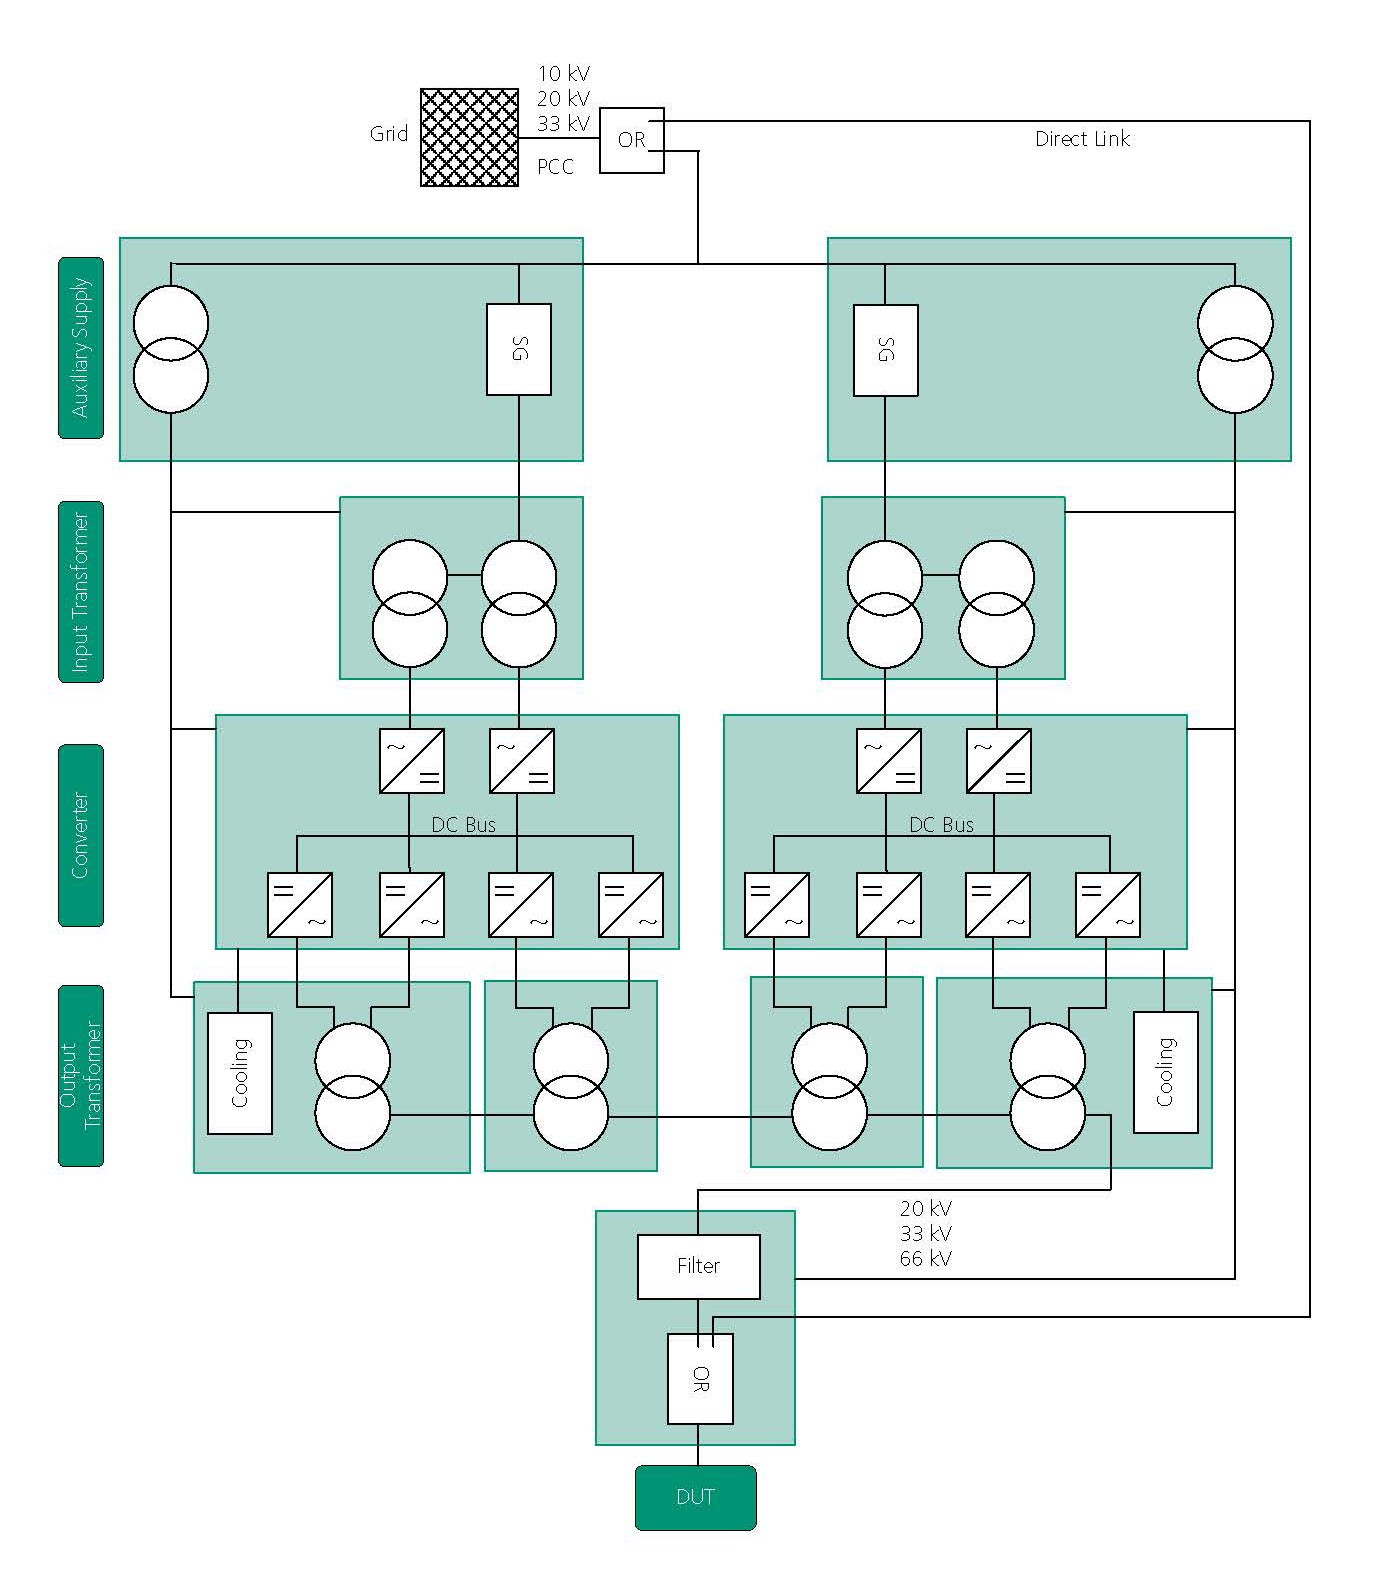 Overview sketch of Mobil-Grid-Co. The components of the test bench will be housed in shipping containers, which are shown with green colored in the overview sketch.